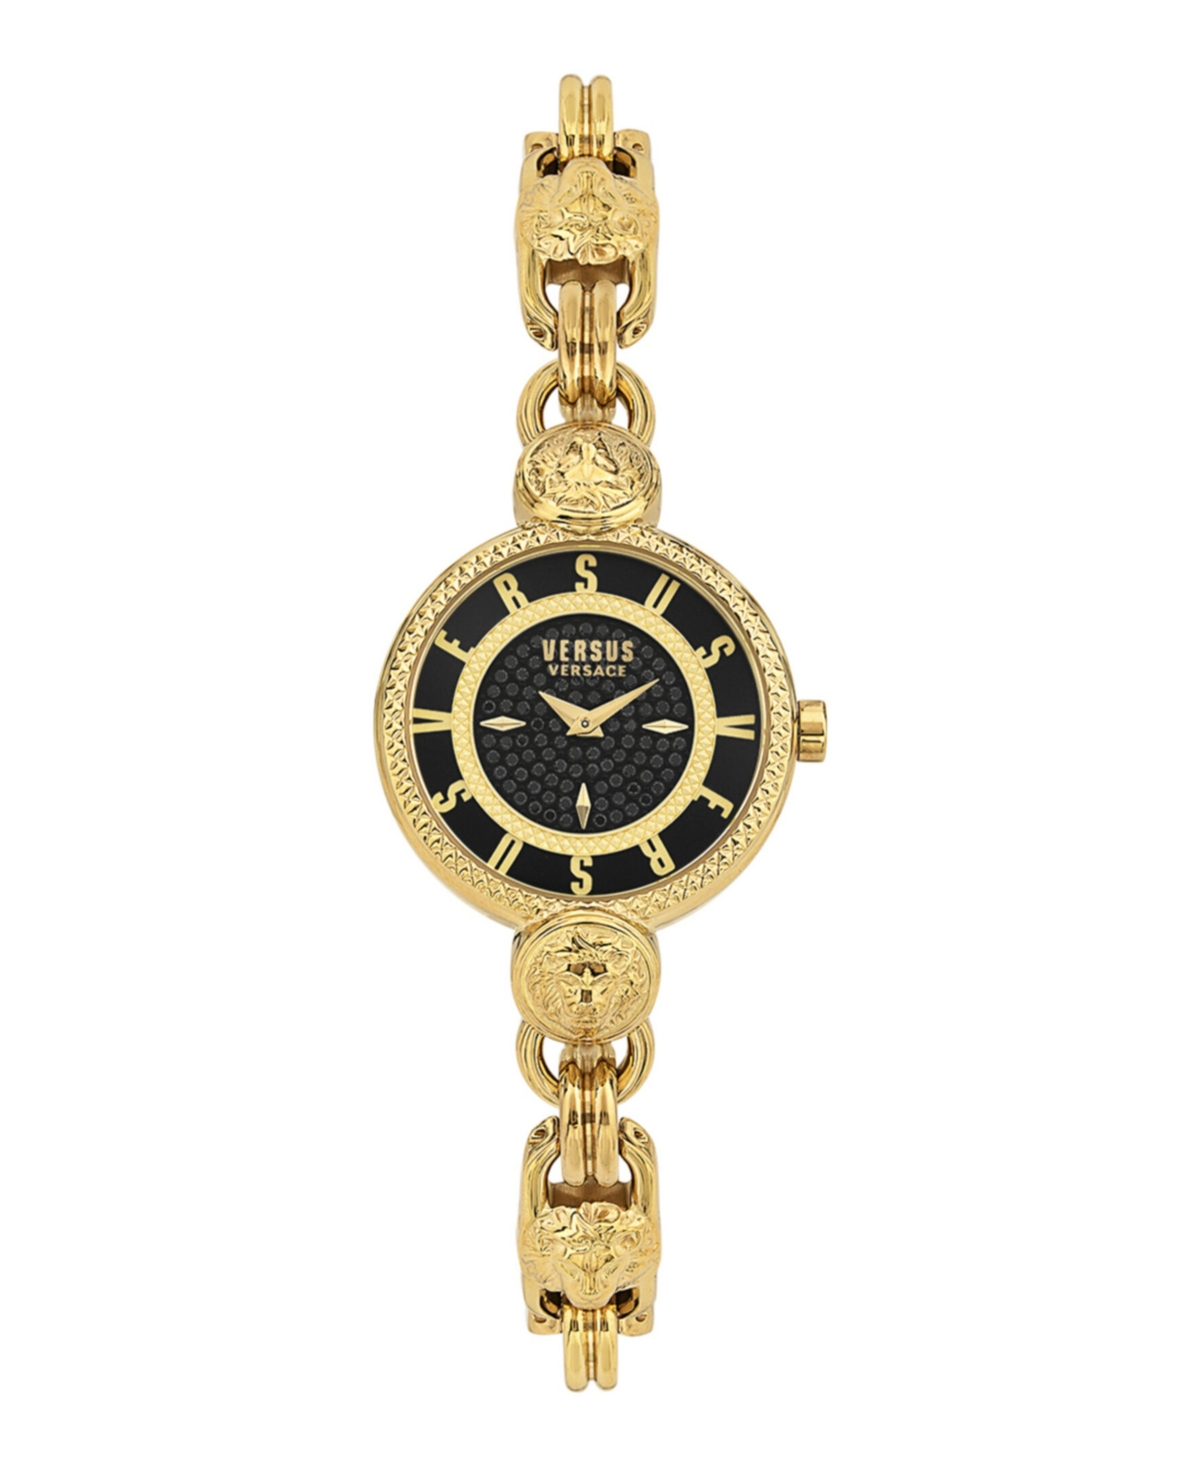 Women's Les Docks Petite 2 Hand Quartz Gold-Tone Stainless Steel Watch, 30mm - Ion Plating Yellow Gold